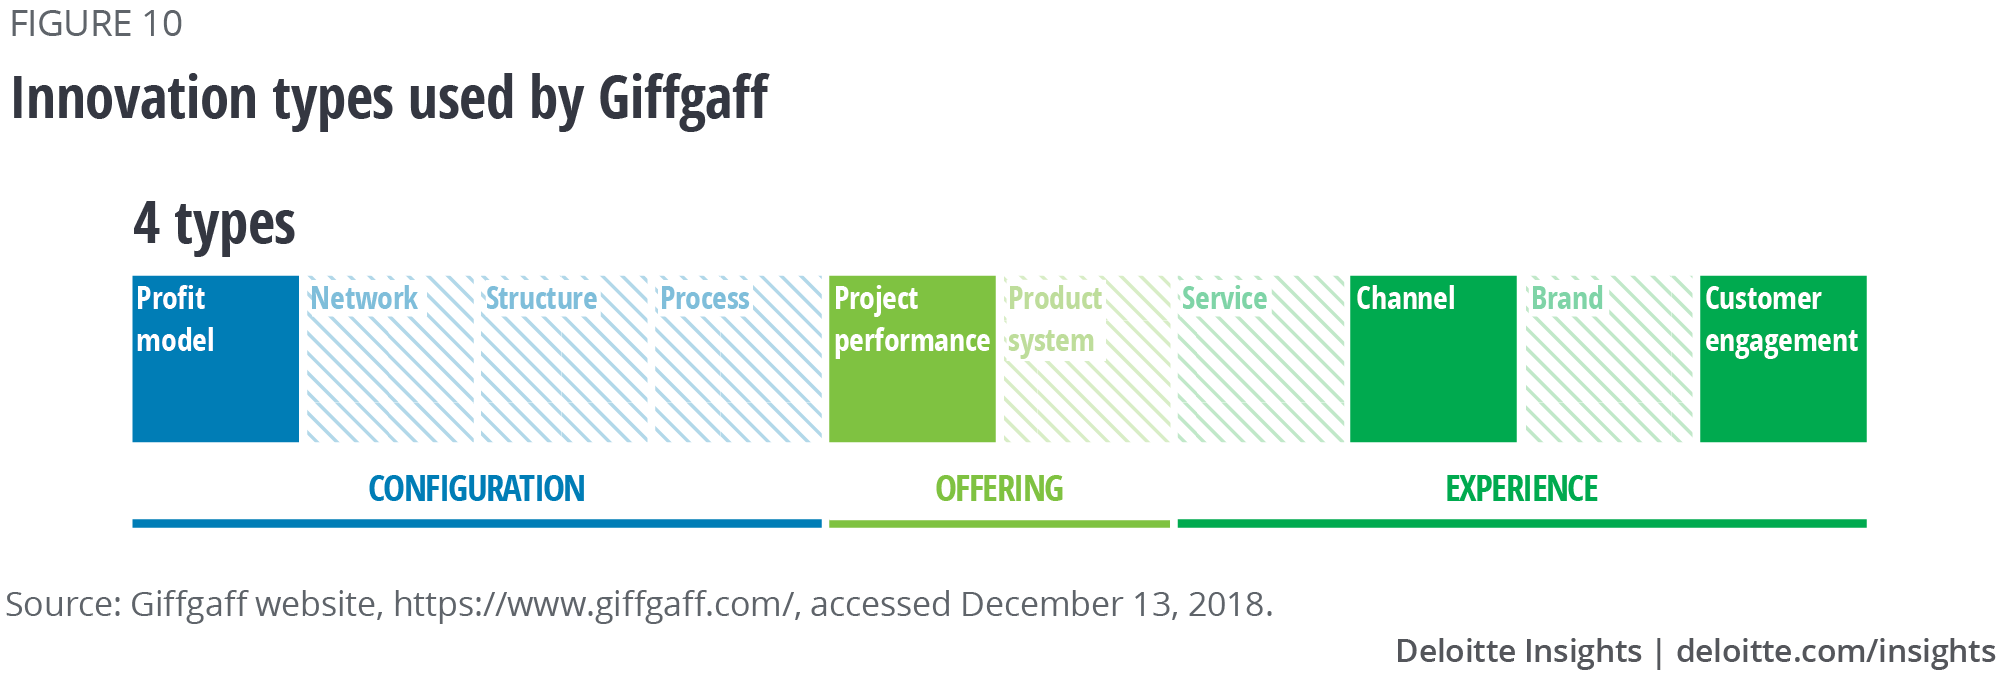 Innovation types used by Giffgaff